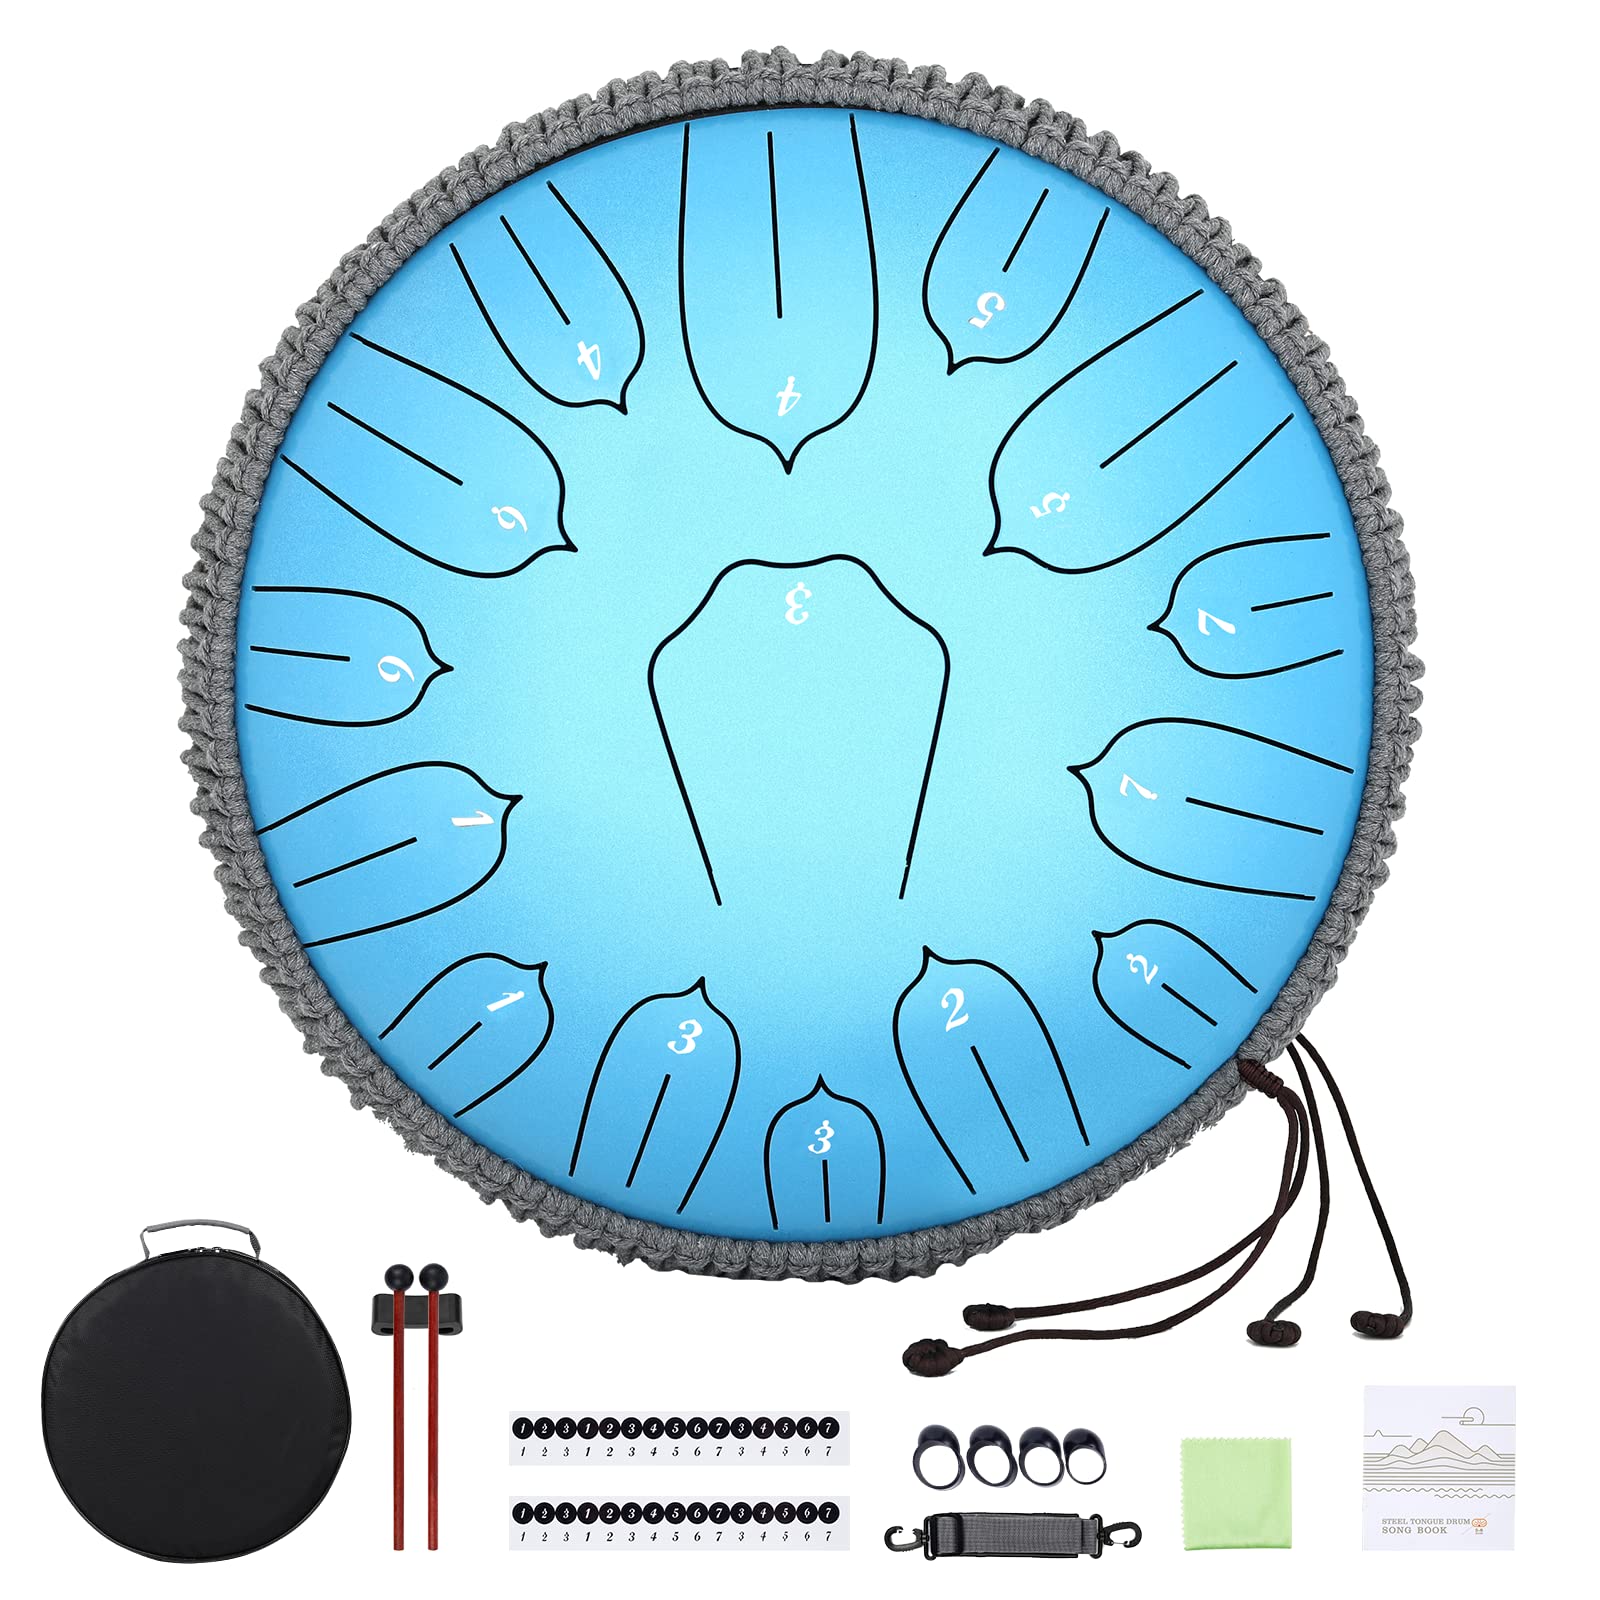 Steel Tongue Drum for Adults: Music Instrument Handpan Drums Set 15 Notes 12 Inch with Bag and Music Book - Healing Percussion Musical Instruments for Meditation Yoga (Blue)